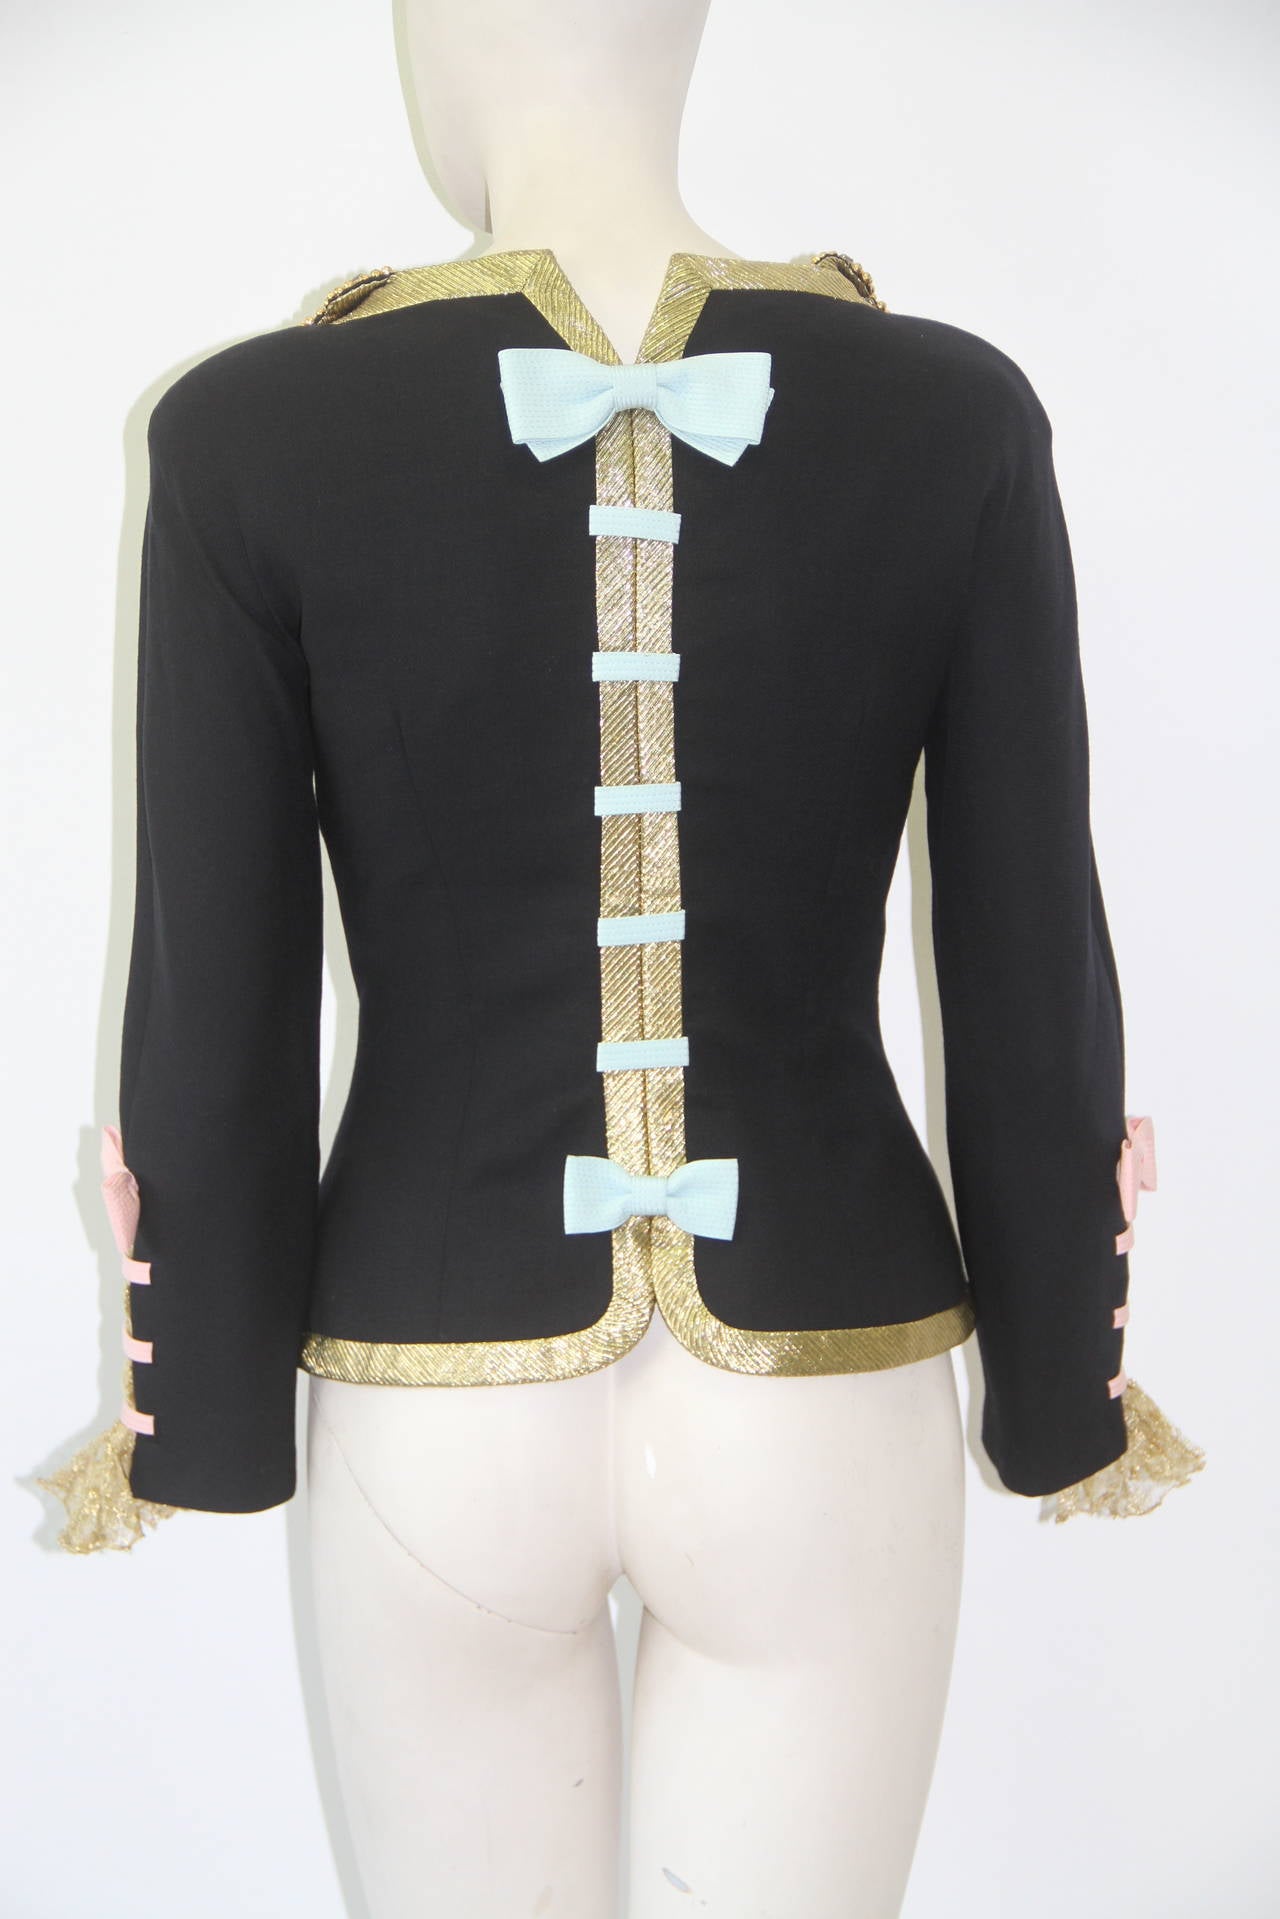 Gianni Versace hand embroidered jewelled evening jacket with bows and gold lurex braid edging, from the Spring 1992 collection.

The jacket is embroidered with blue jet and paste stones and gold silk thread. 

The jacket featured in the